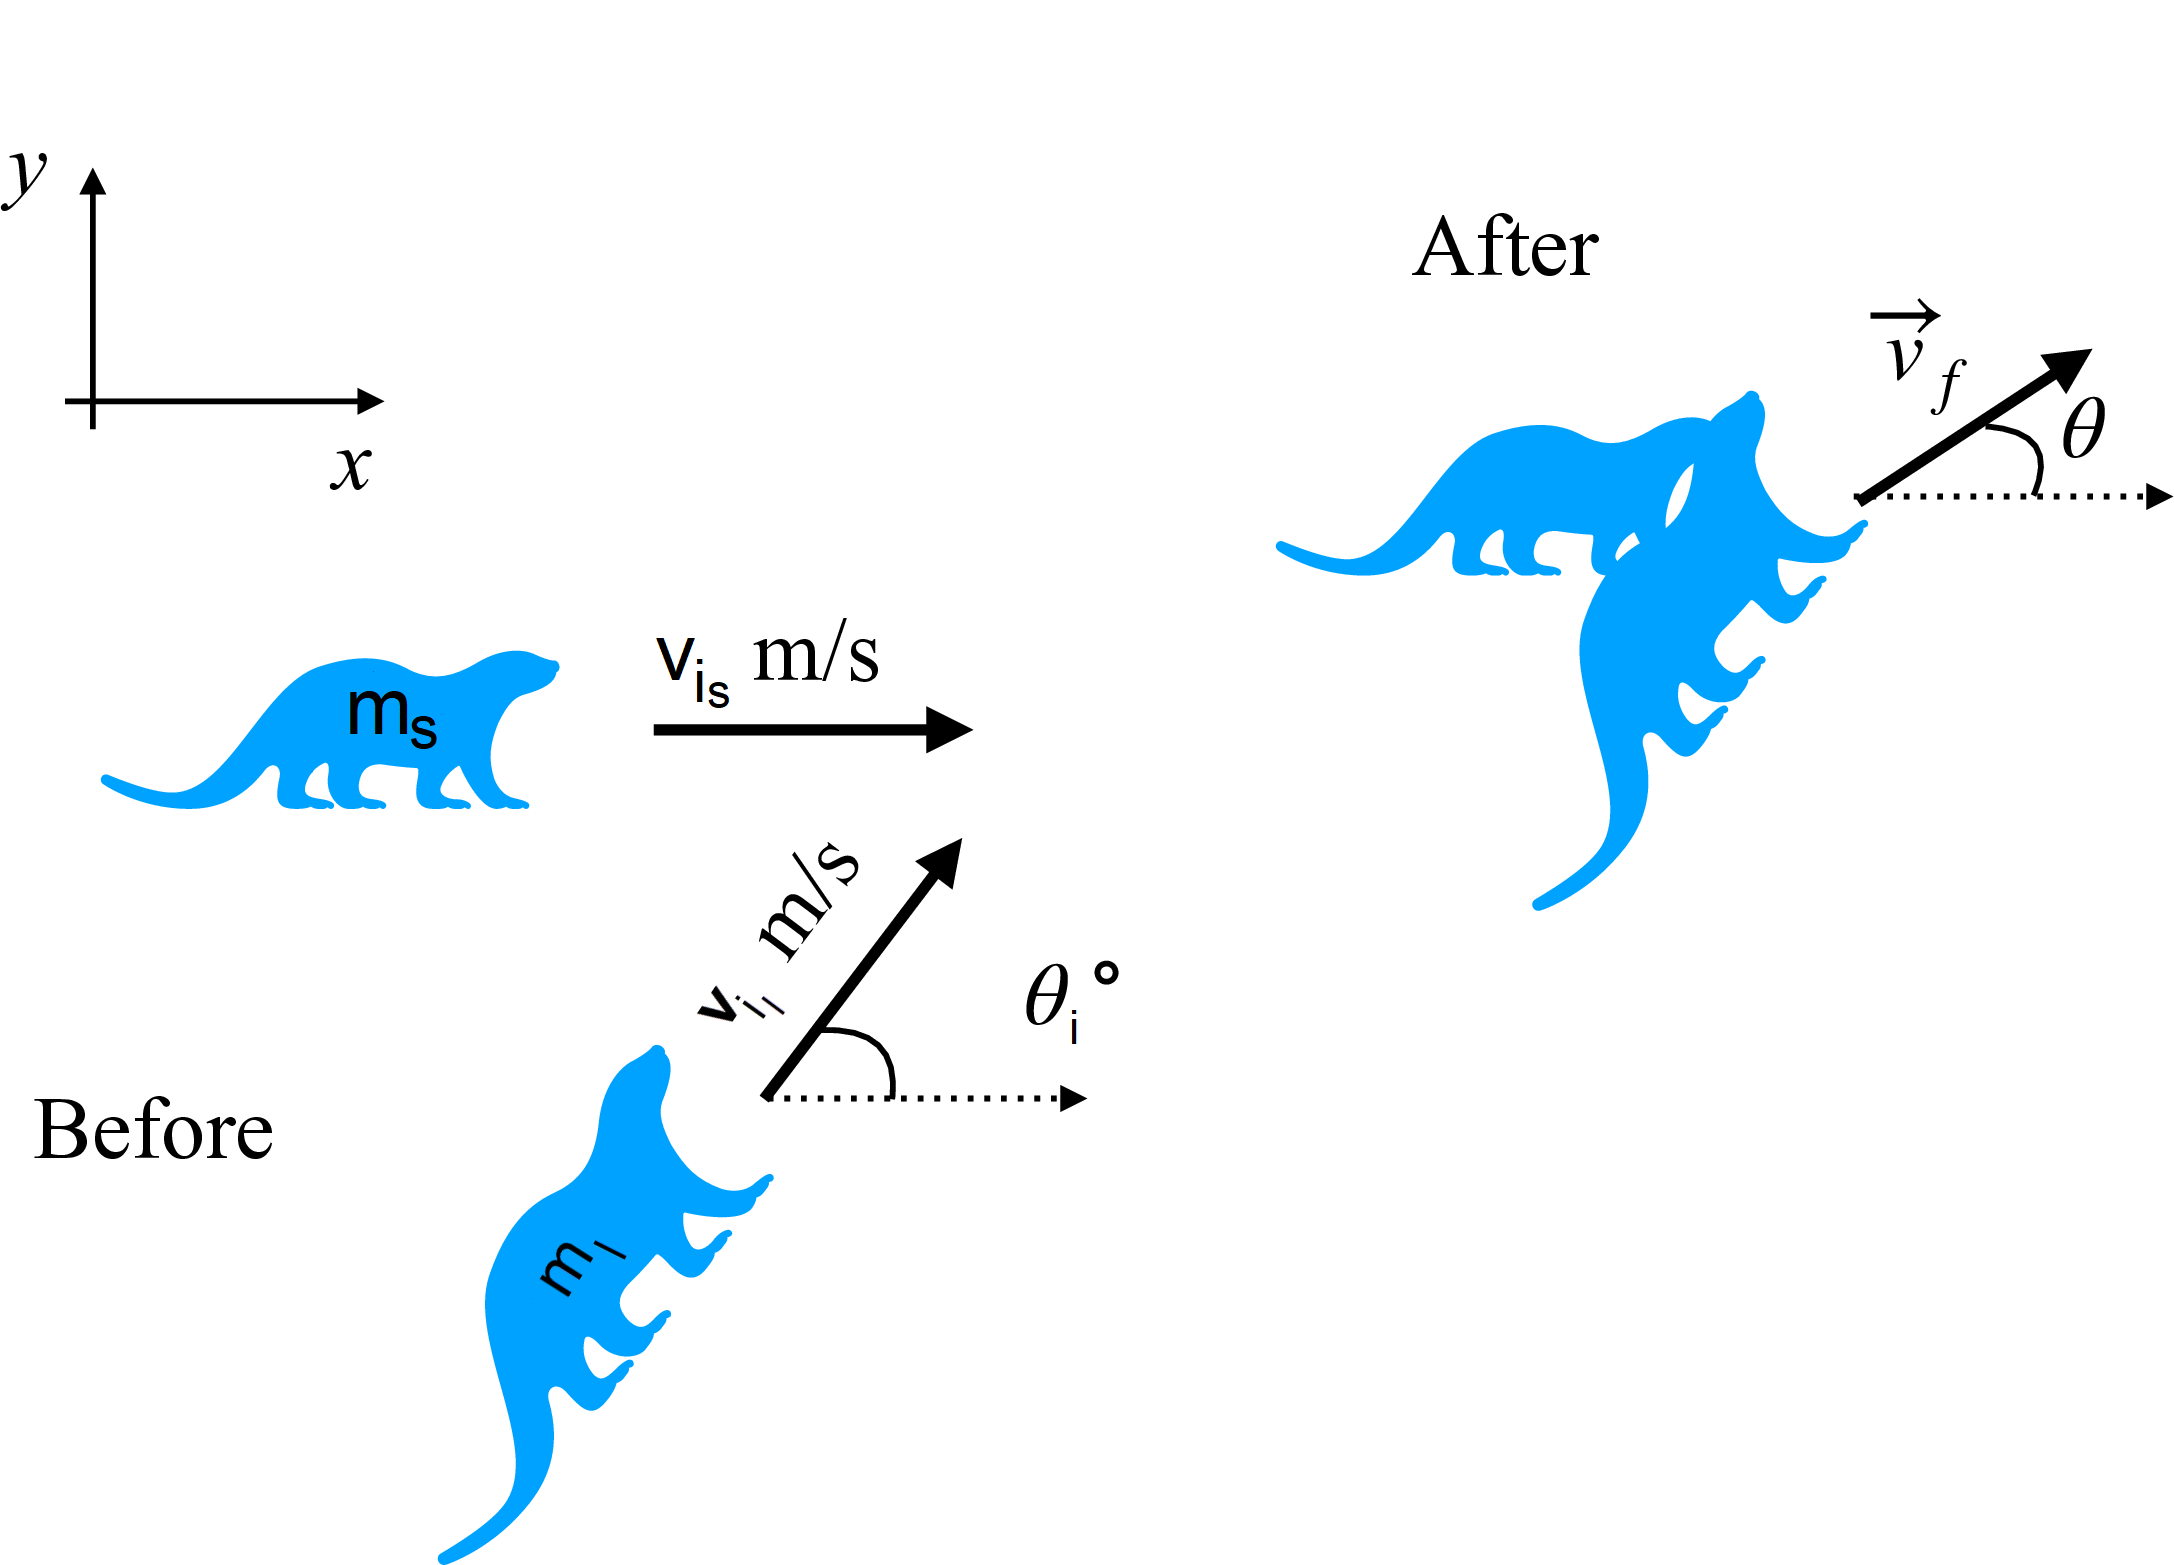 Figure of two river otters before and after collision. The coordinate system is a traditional cartesian plane. The two otters tangle after collision and move with velocity v f at an angle theta with respect to the horizontal axis.